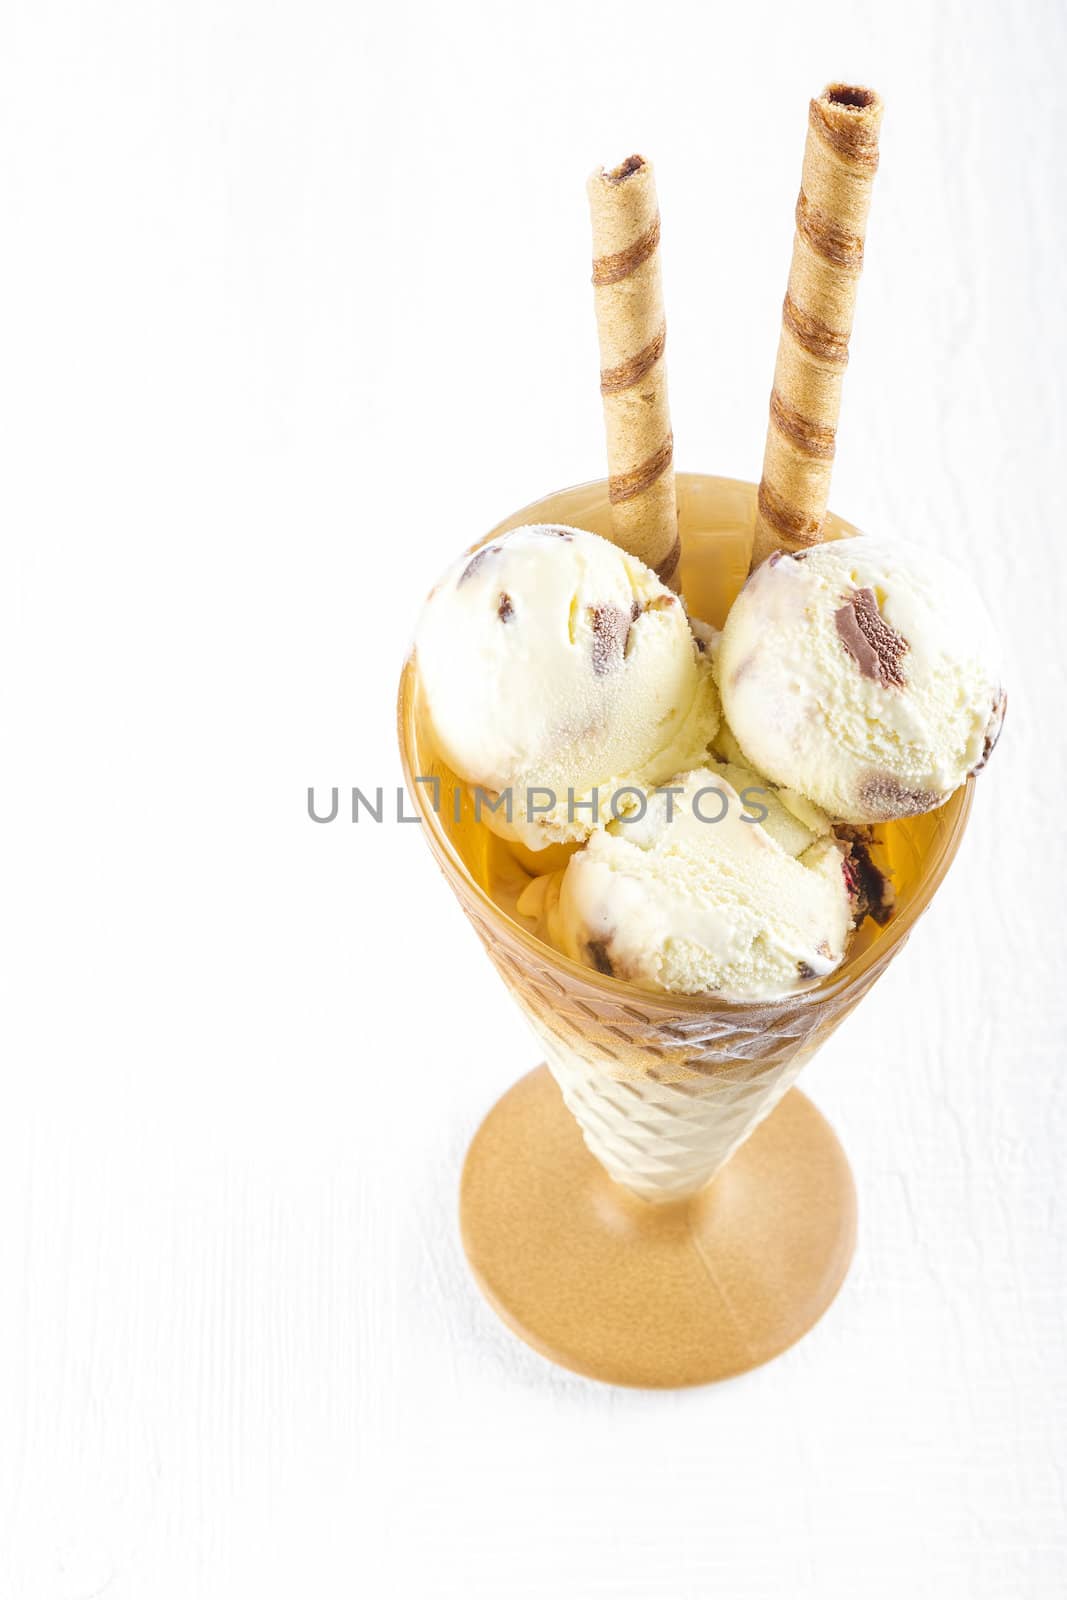 Vanilla ice cream  with wafer in cup  by manaemedia